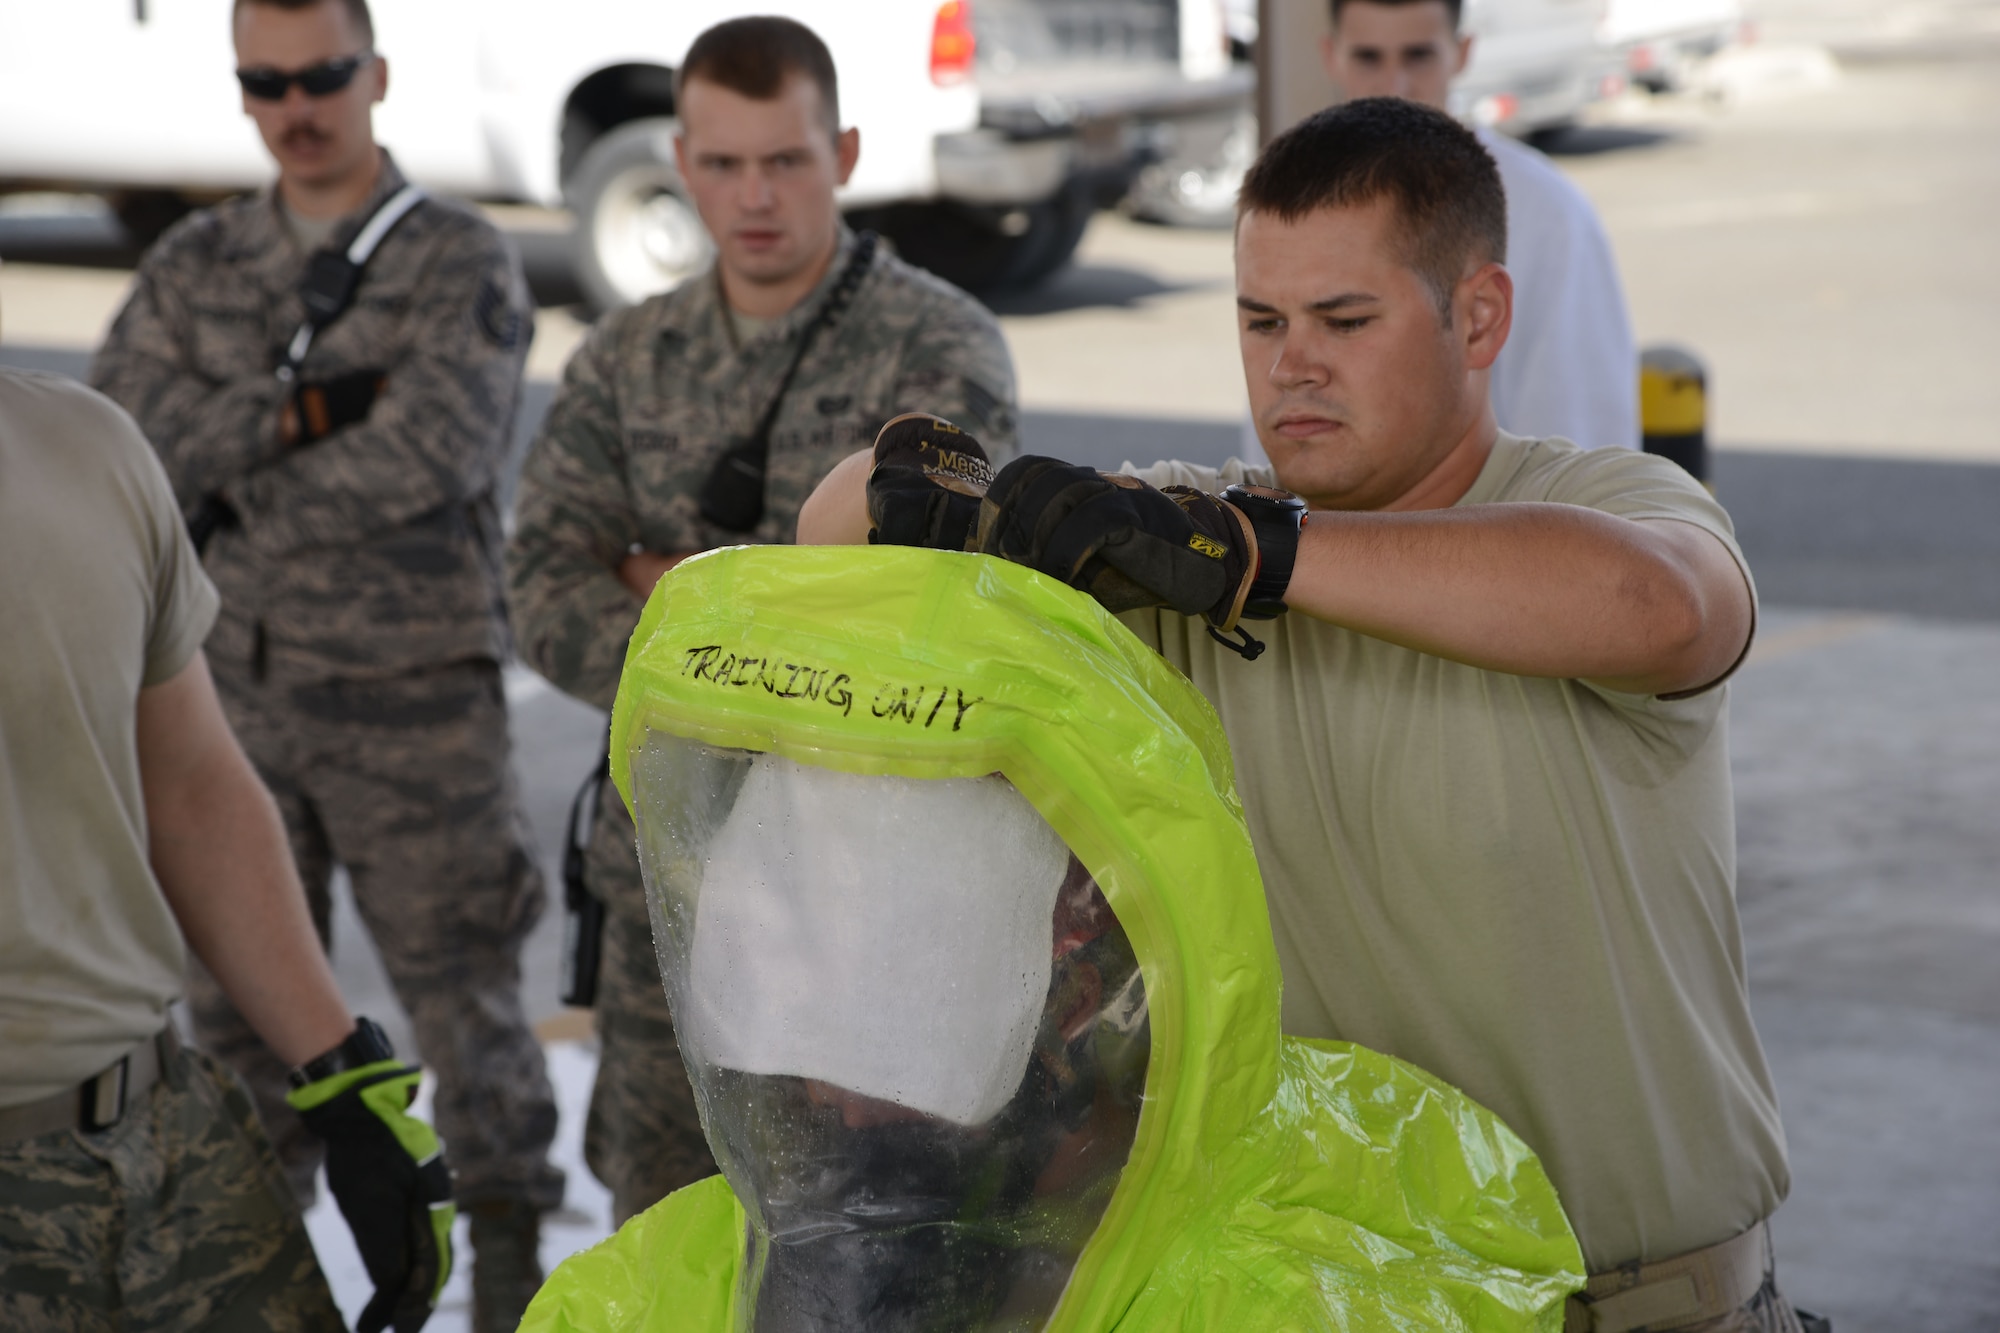 Senior Airman Cameron Hopper (right), 386th Expeditionary Civil Engineer Squadron fire department, helps a fellow firefighter out of a Level A Hazardous Material suit Dec. 19, 2014. The course is required for all Air Force firefighters and includes the initial training and an annual refresher course. (U.S. Air Force photo by Tech. Sgt. Jared Marquis/released)